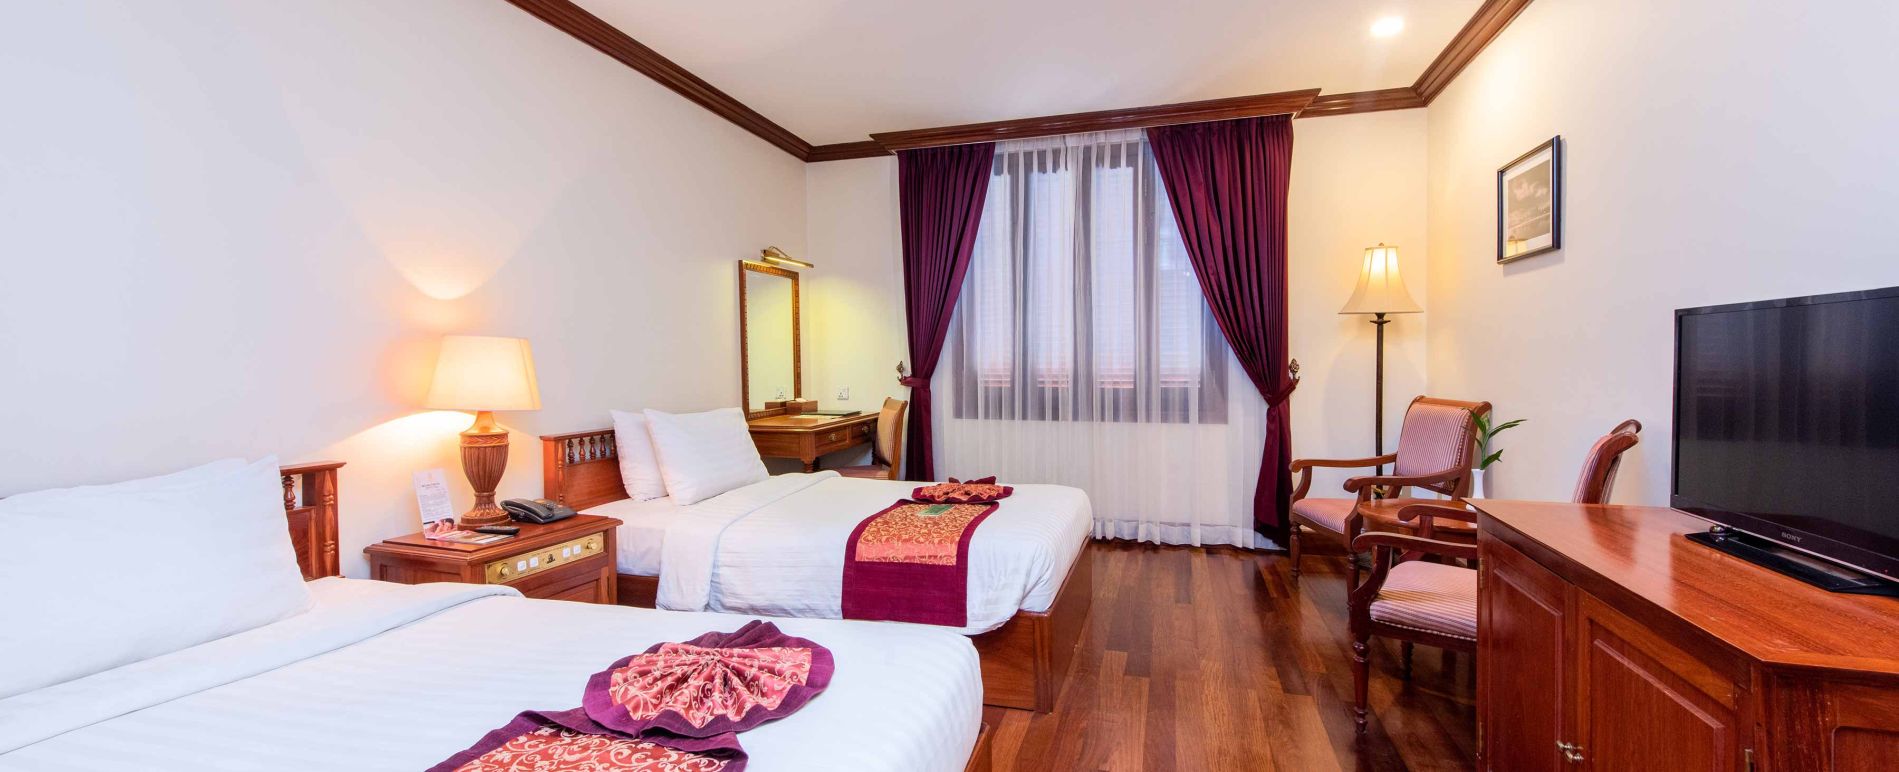 Welcome to Steung Siem Reap Hotel, Siem Reap - Official Site